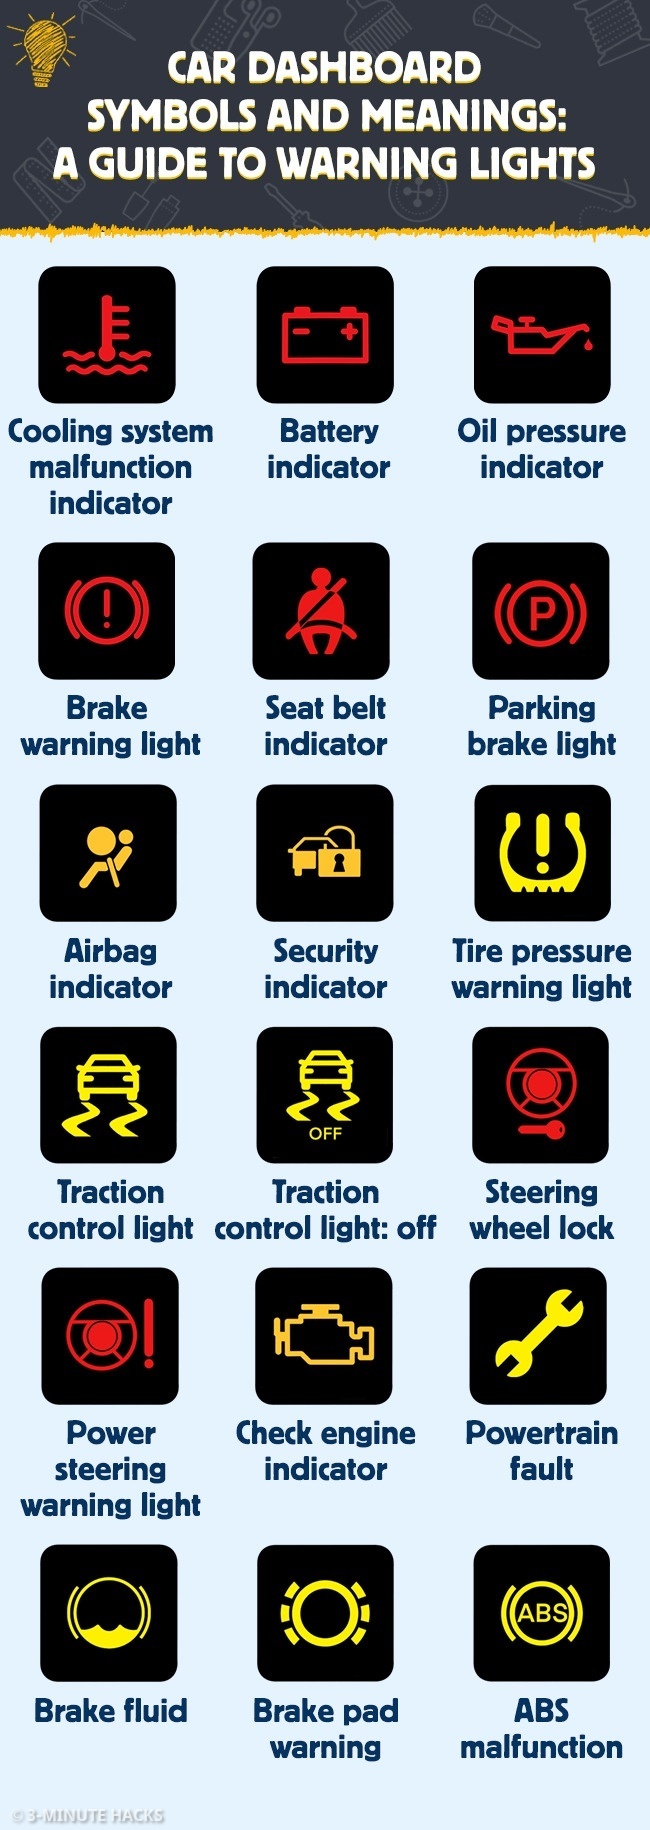 Car dashboard symbols and meanings